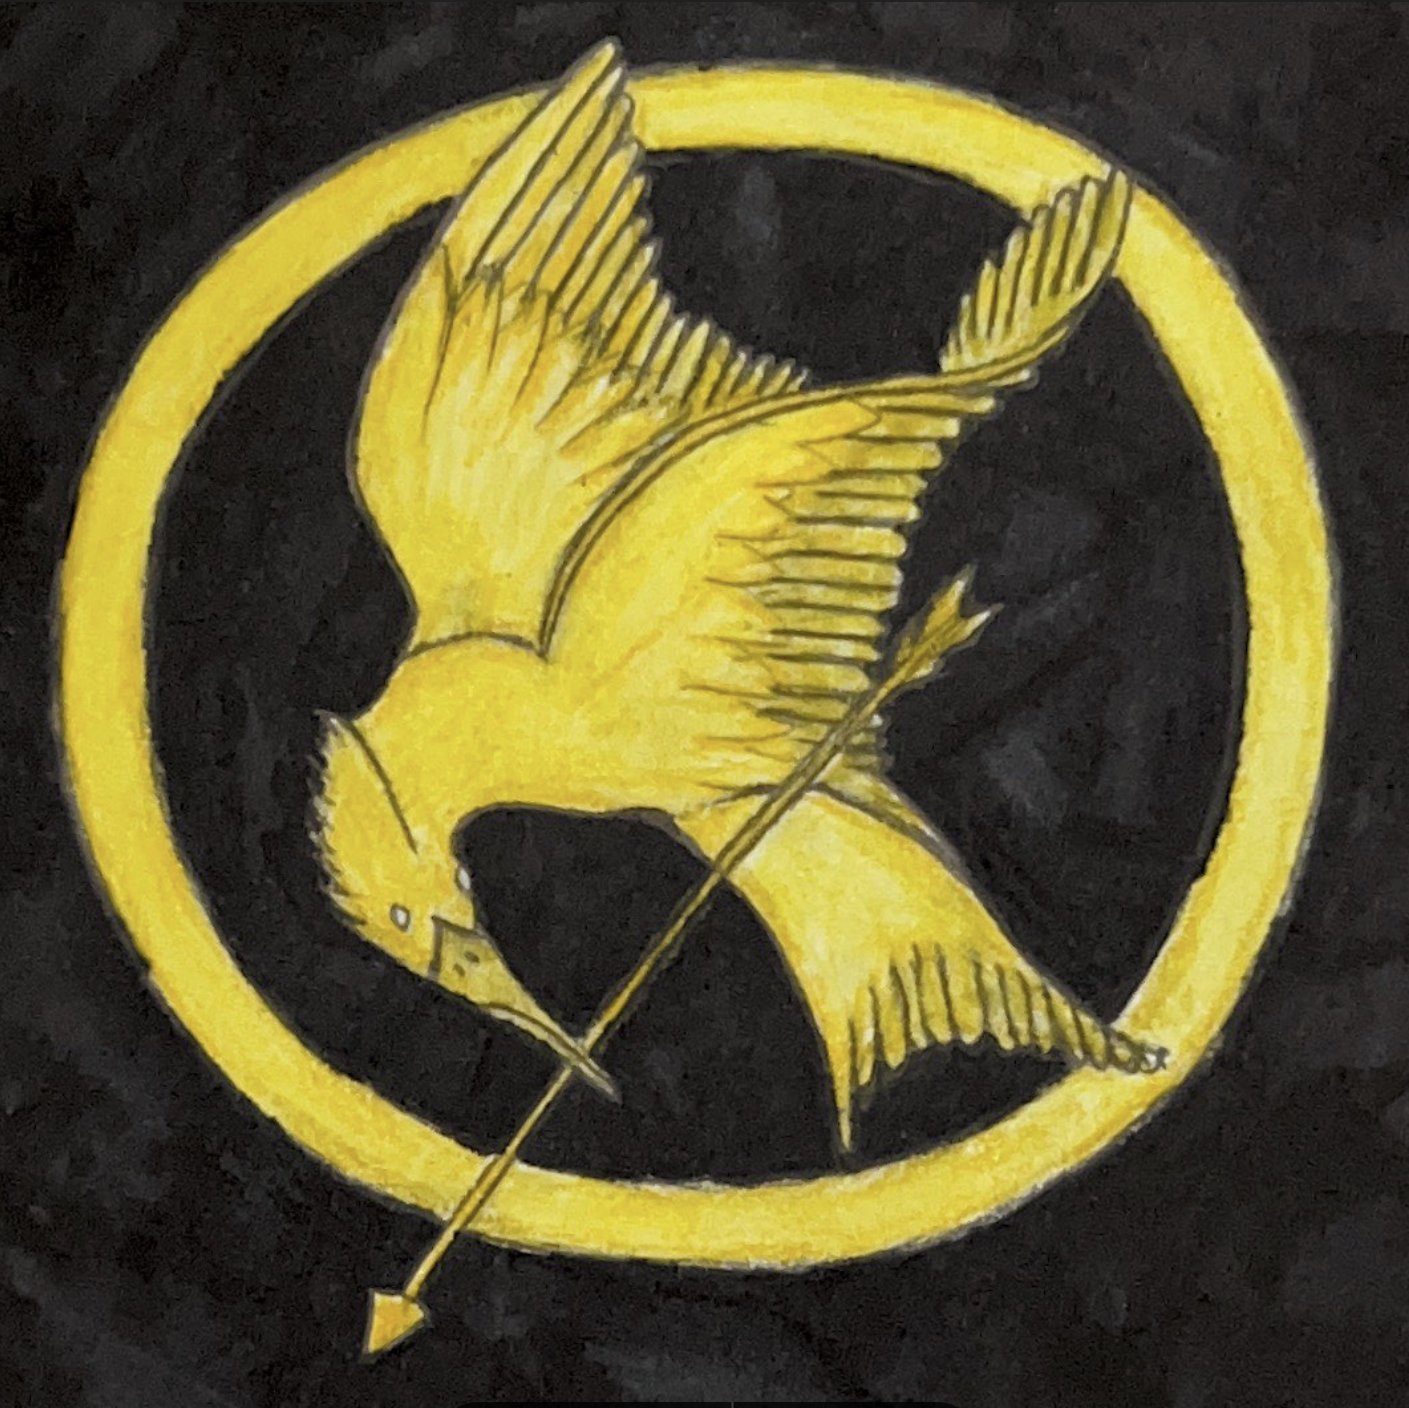 How To Draw Hunger Games, The Hunger Games Logo, Step by Step